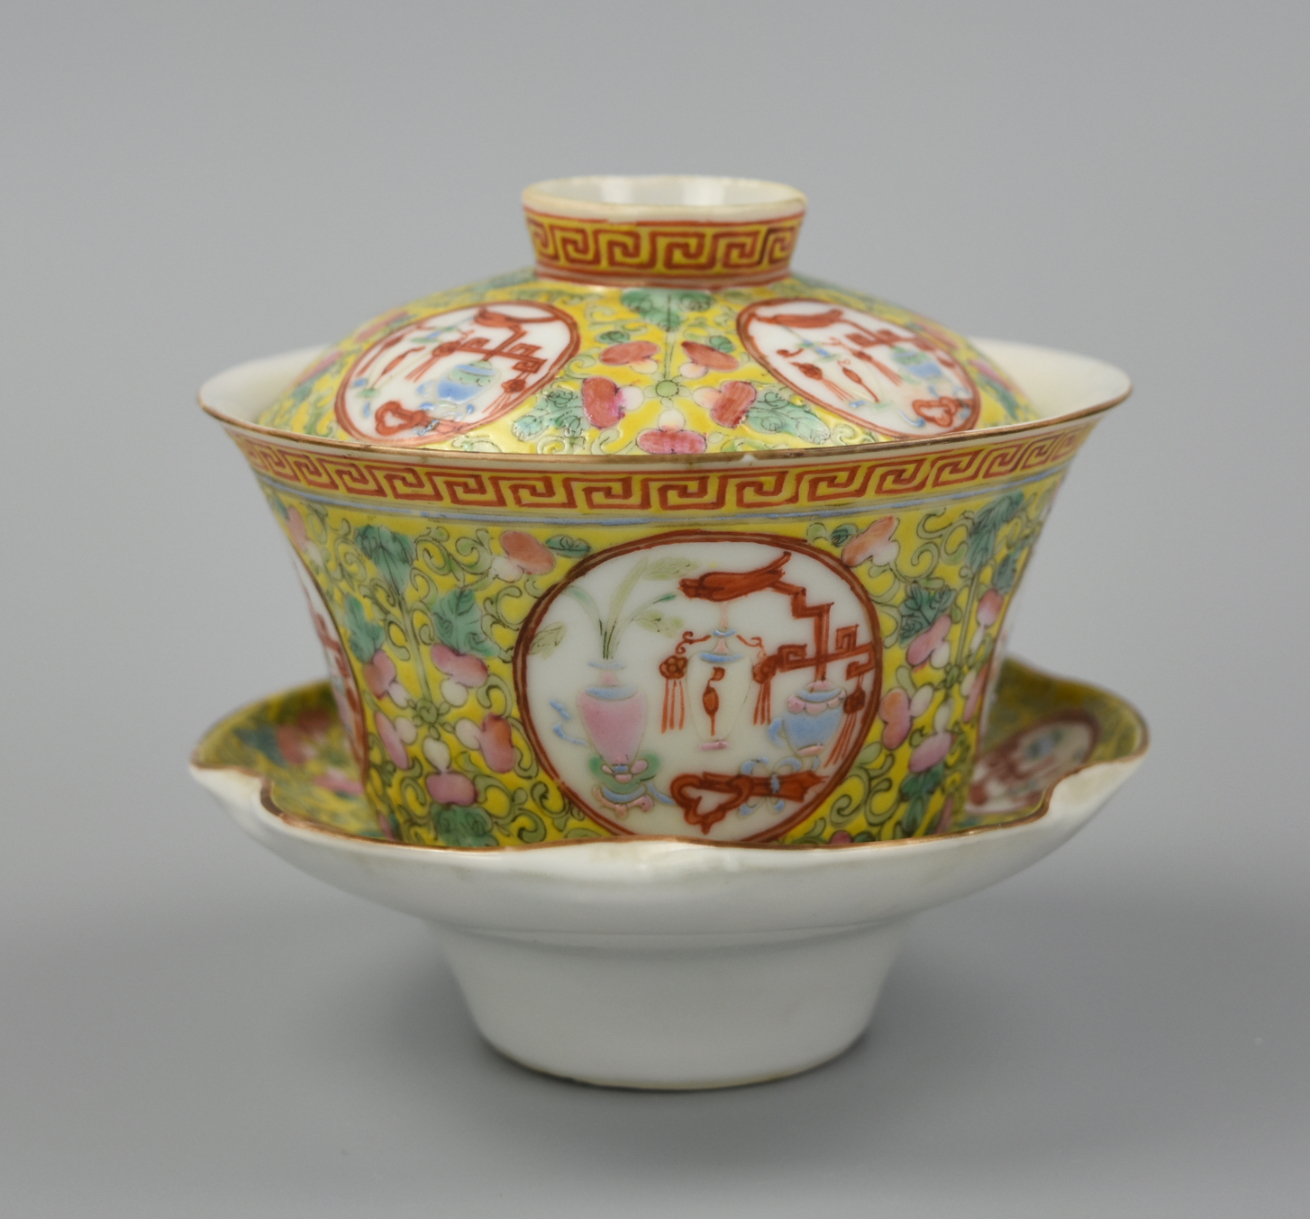 CHINESE FAMILLE ROSE YELLOW TEACUP 2cf42f